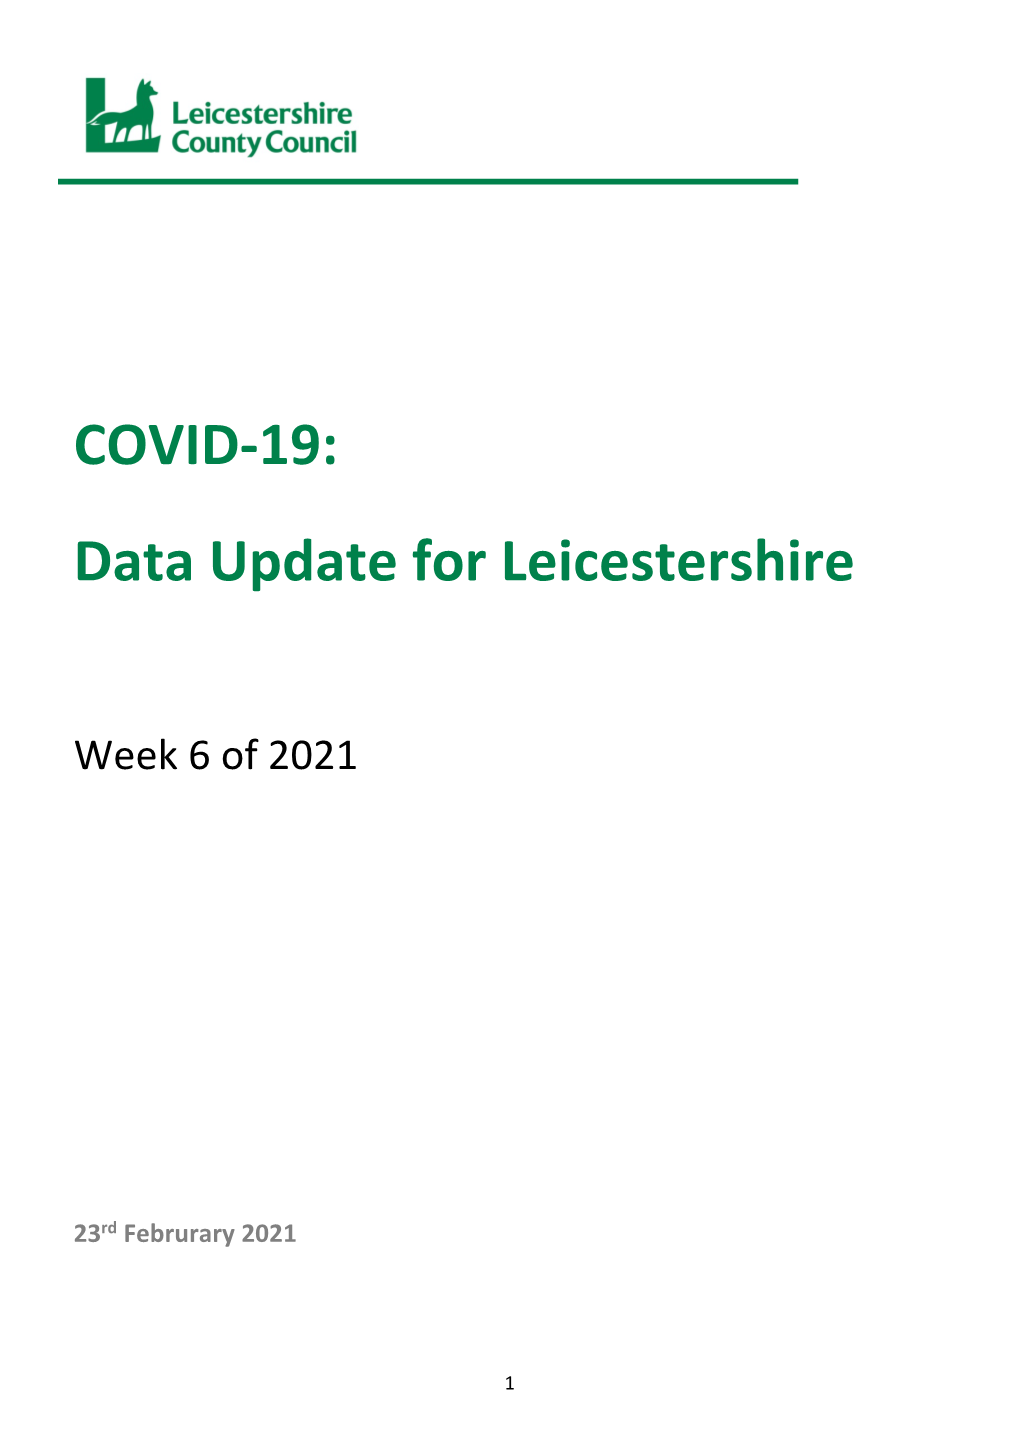 COVID-19 Data Update for Leicestershire (Week 6 of 2021)